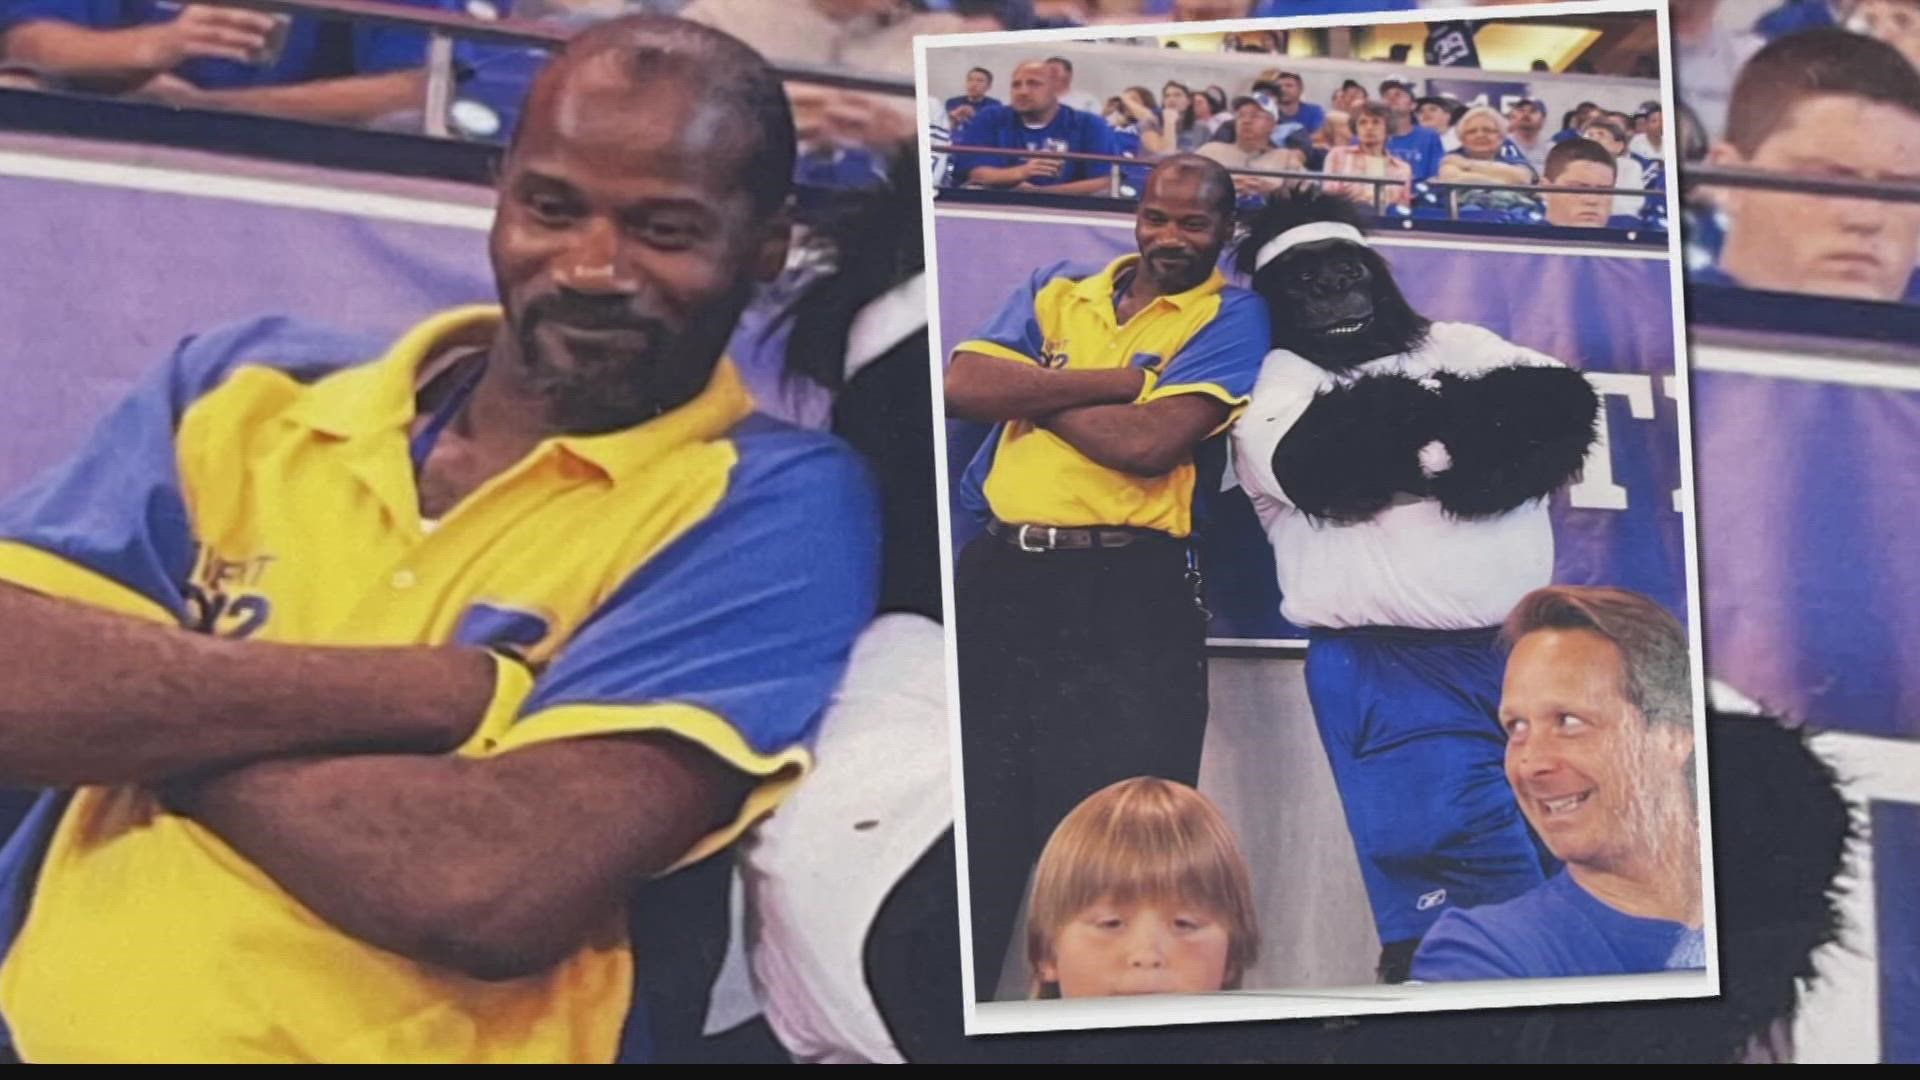 Kevin Martin applied for a stadium security job in 2011 and became a popular usher with Colts fans in Section 144